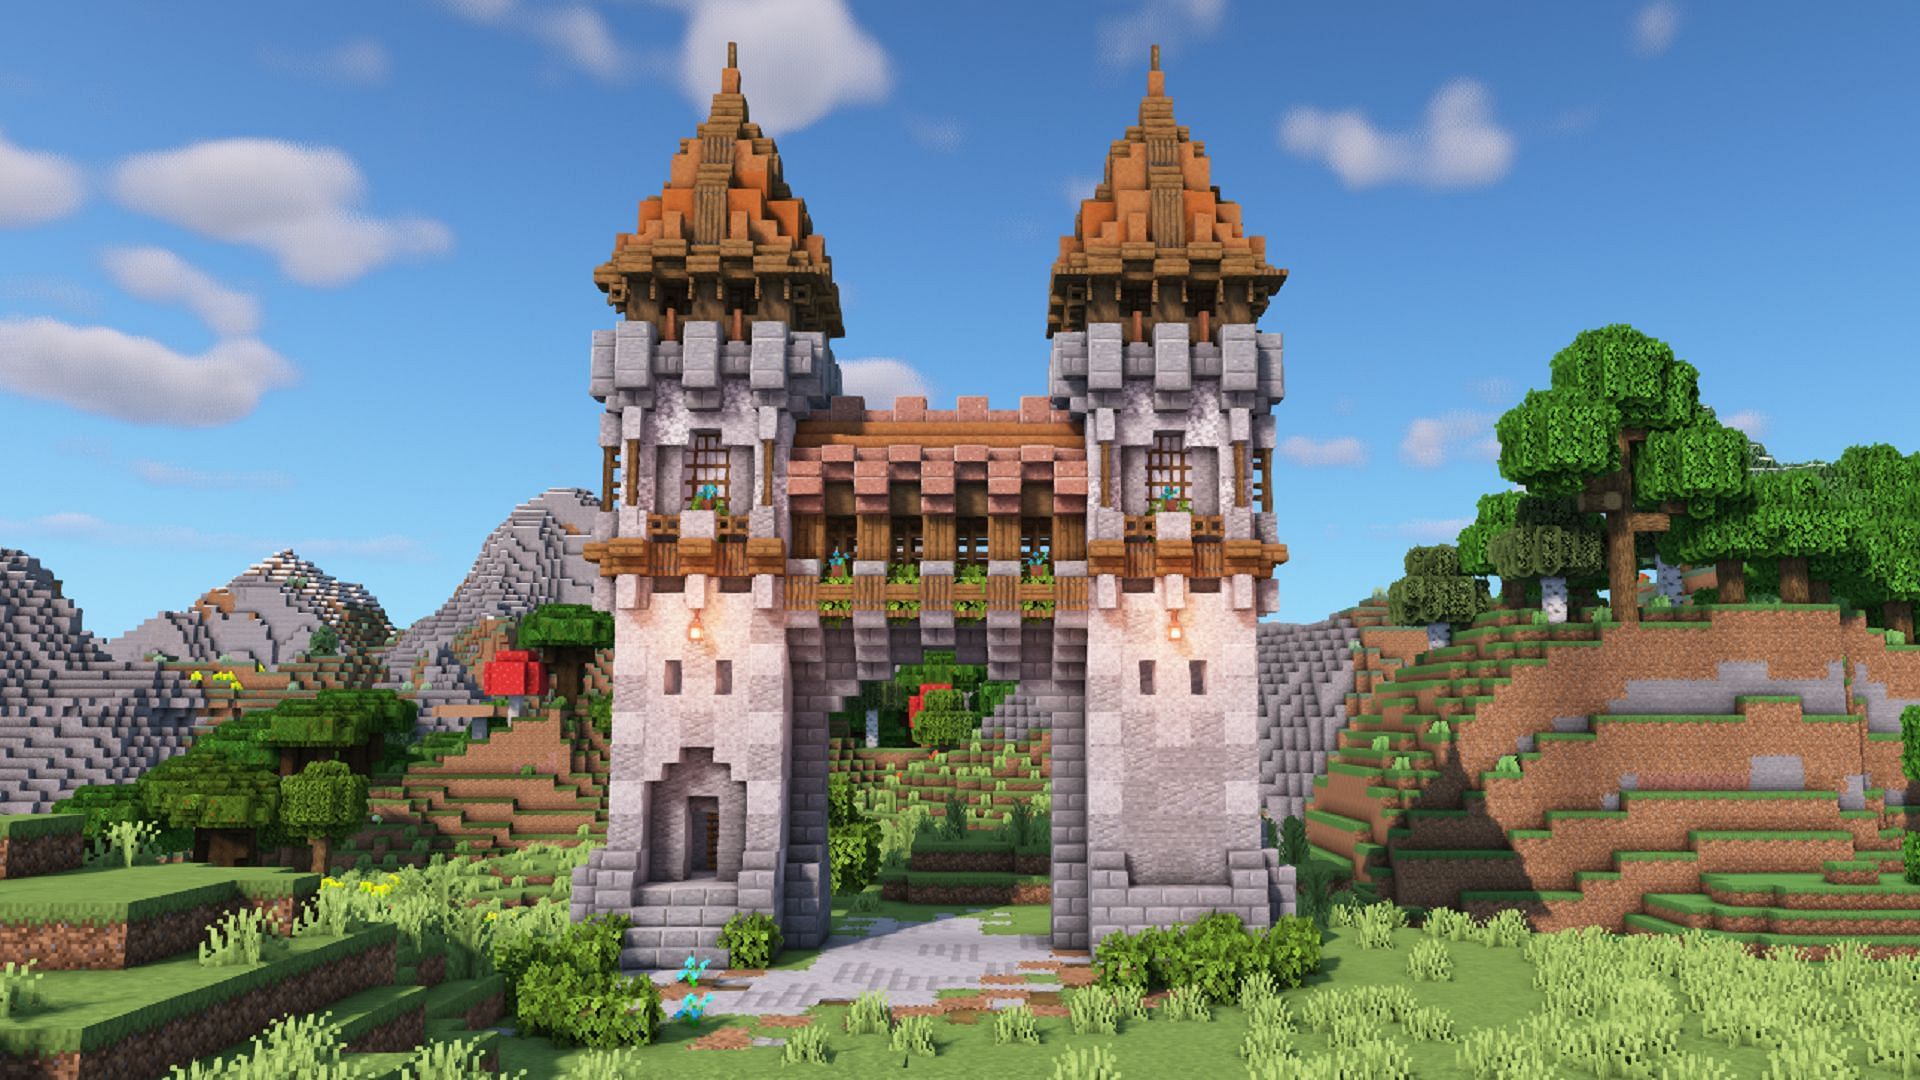 This gatehouse provides a visible access point to enter a medieval Minecraft town (Image via u/Wansom_Wang/Reddit, Mojang)